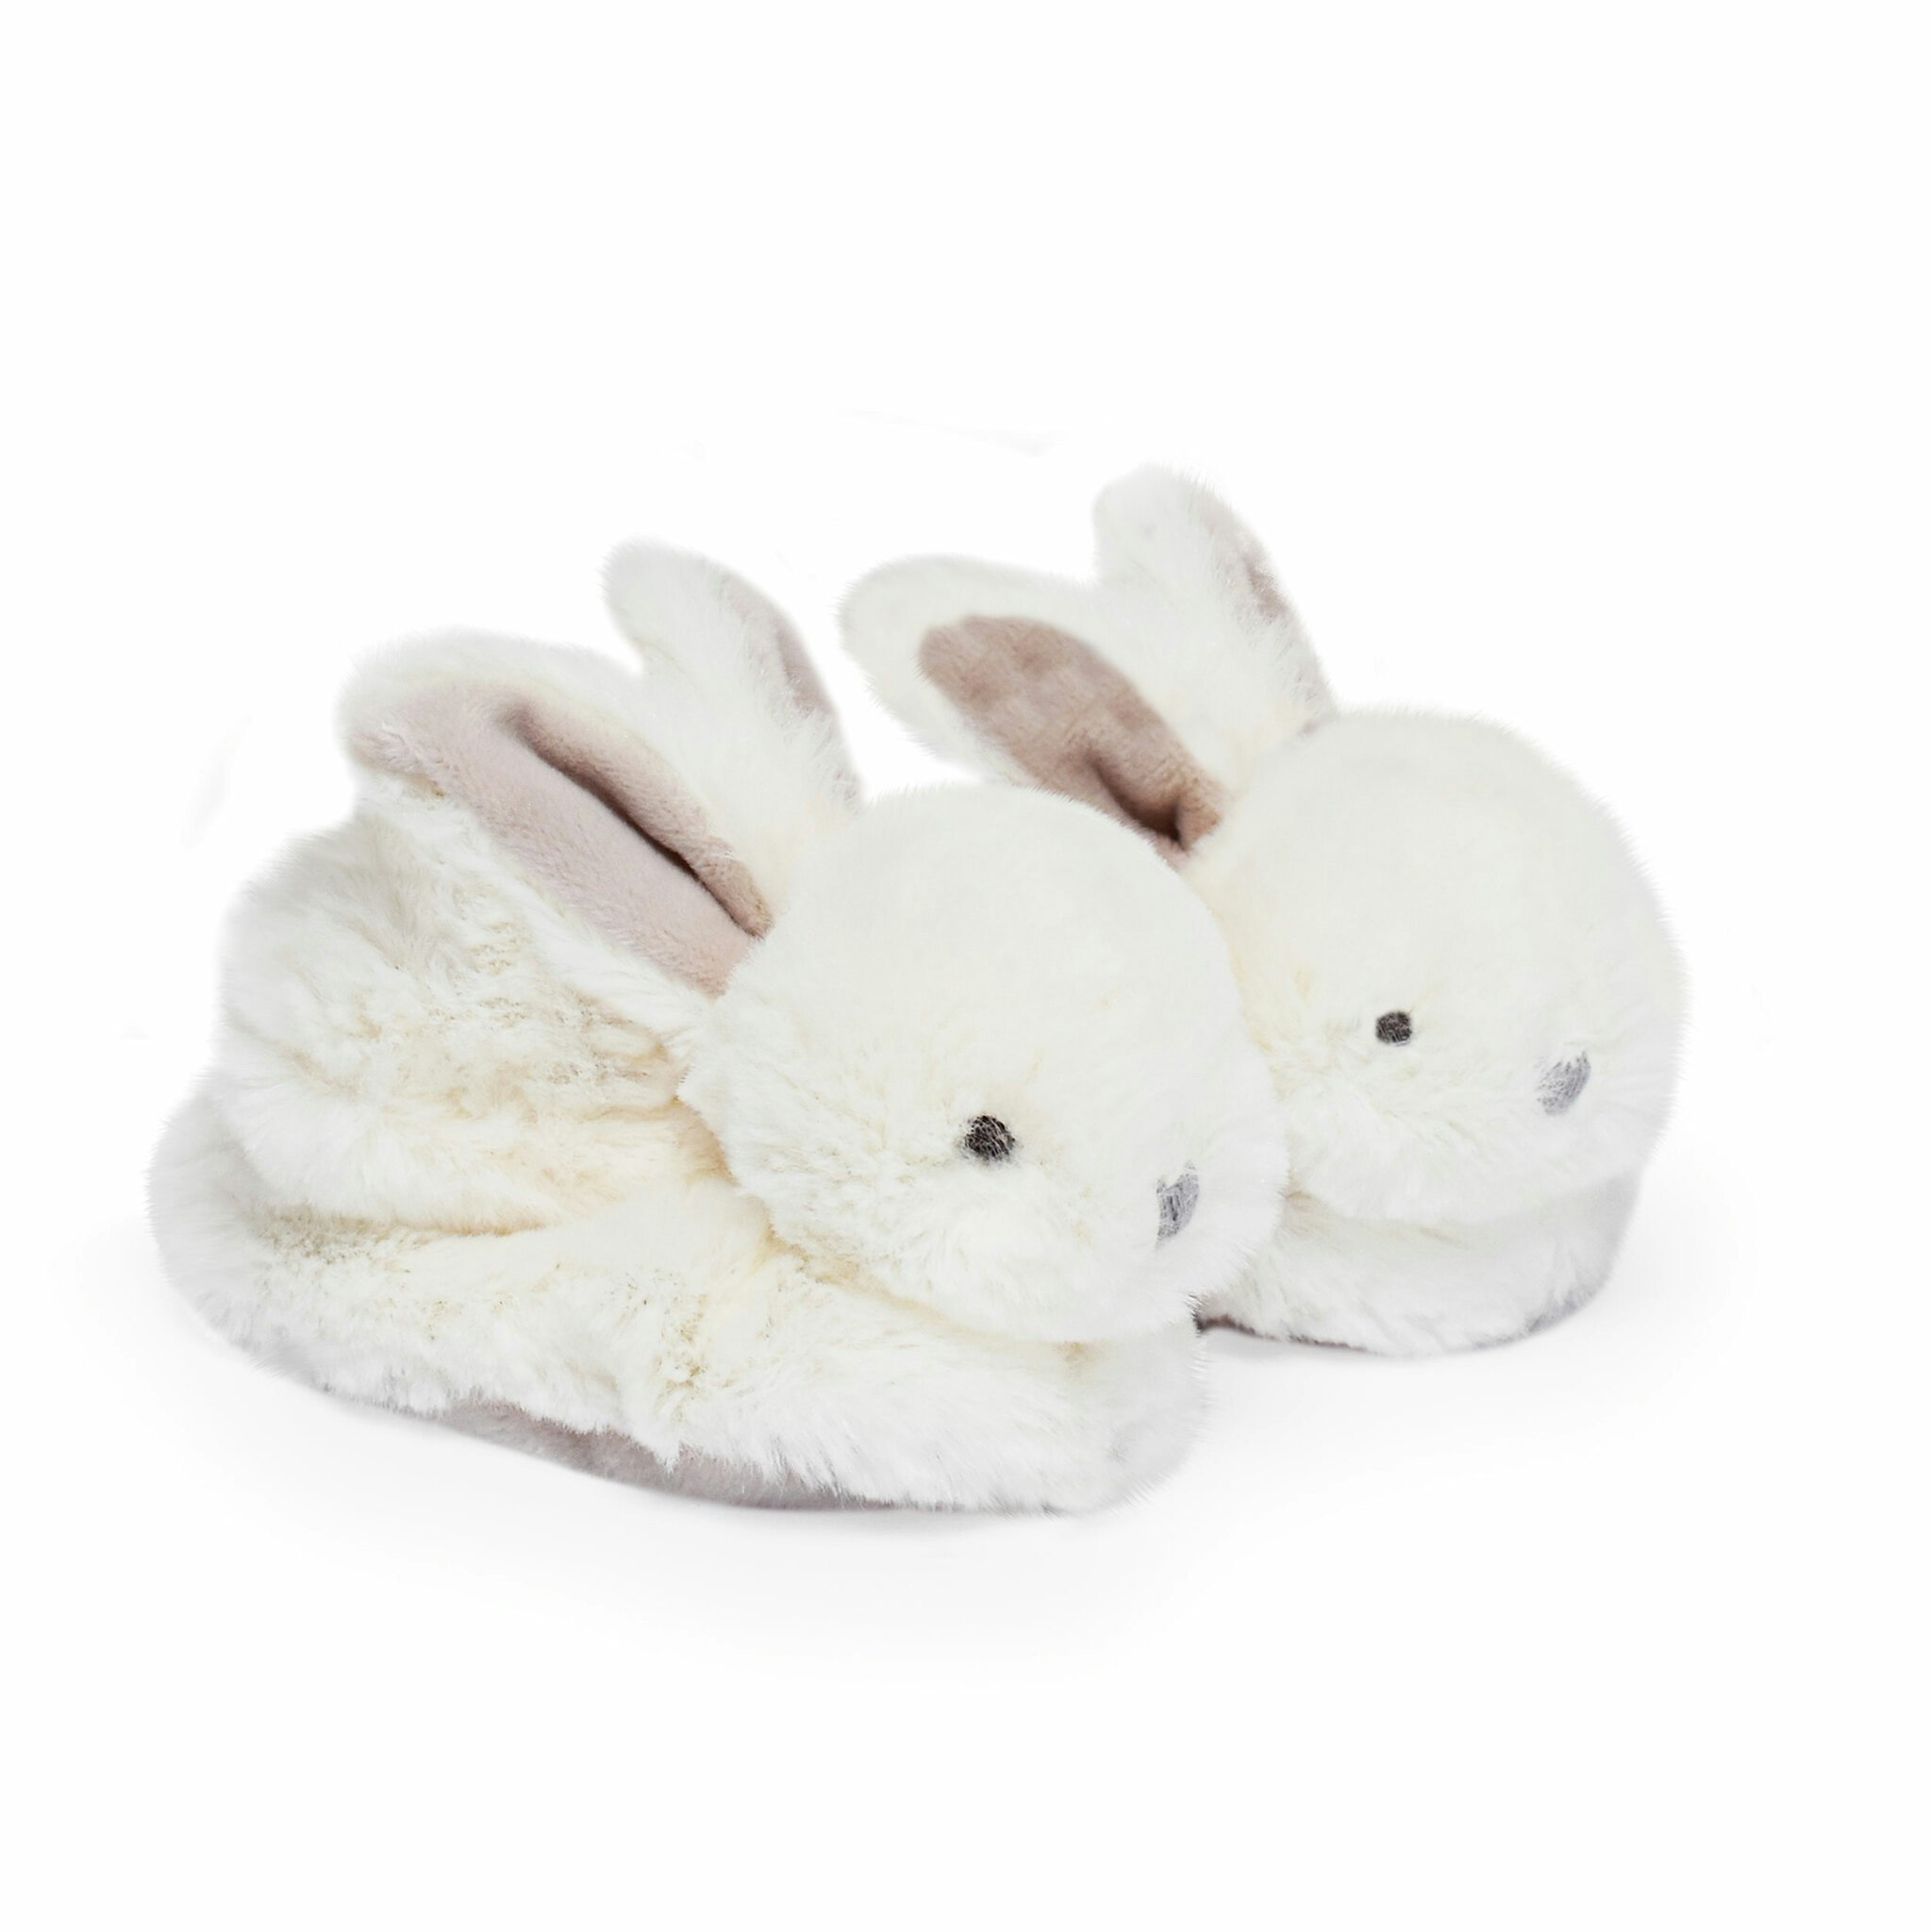 Kopia Doudou Et Compagnie- LAPIN BONBON Booties with Rattle, Taupe - 0/6 months